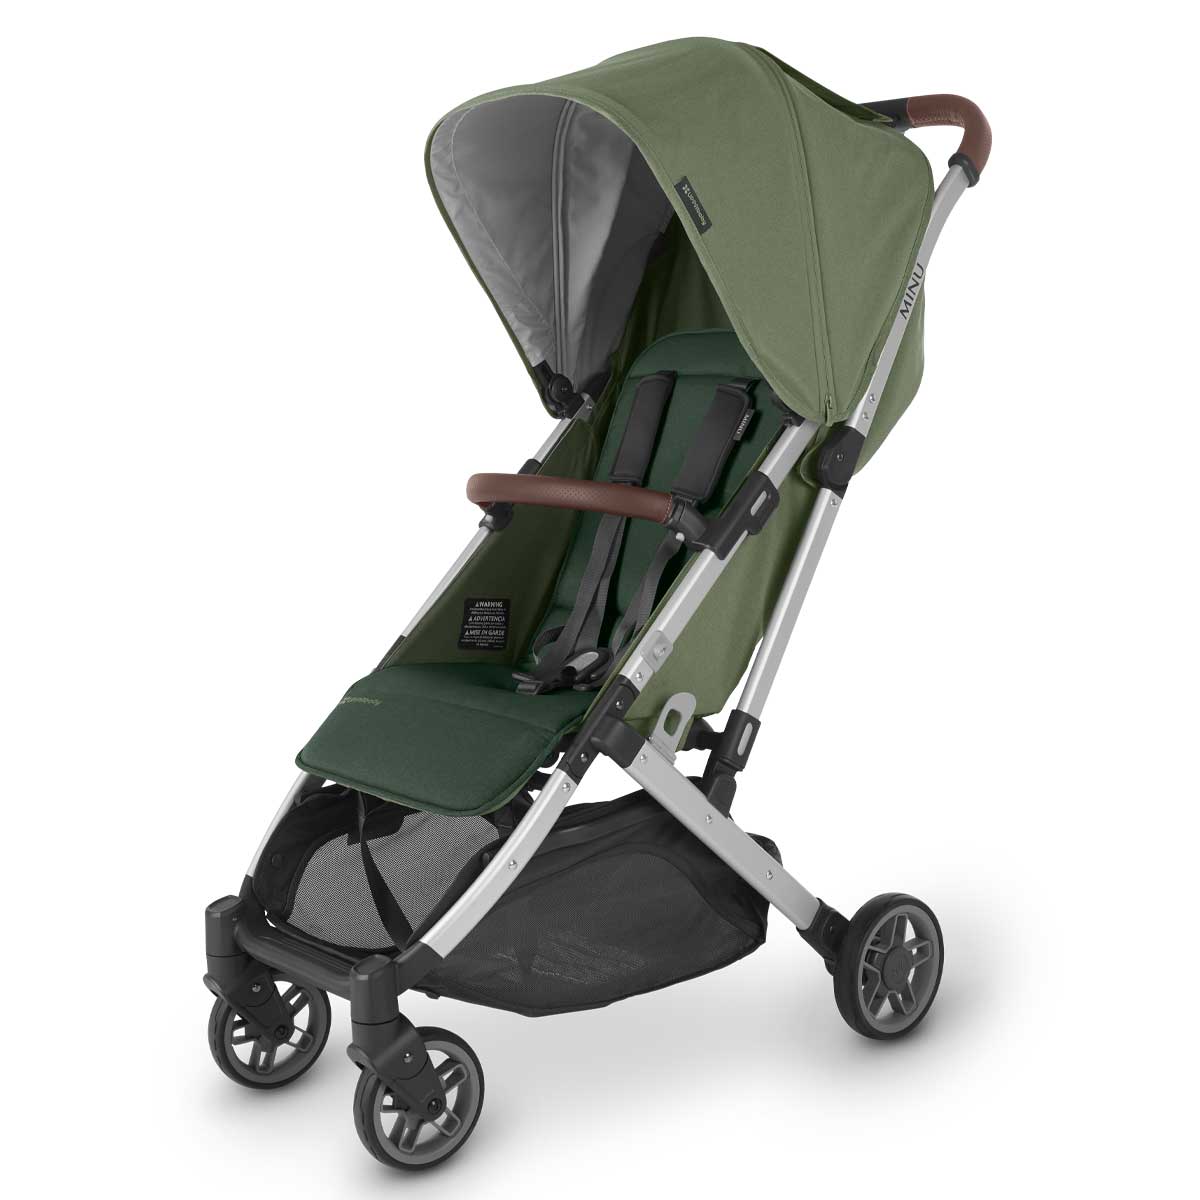 UPPAbaby compact stroller UPPAbaby MINU V2 Stroller - Emelia (Sage Green/Silver/Chestnut Leather)